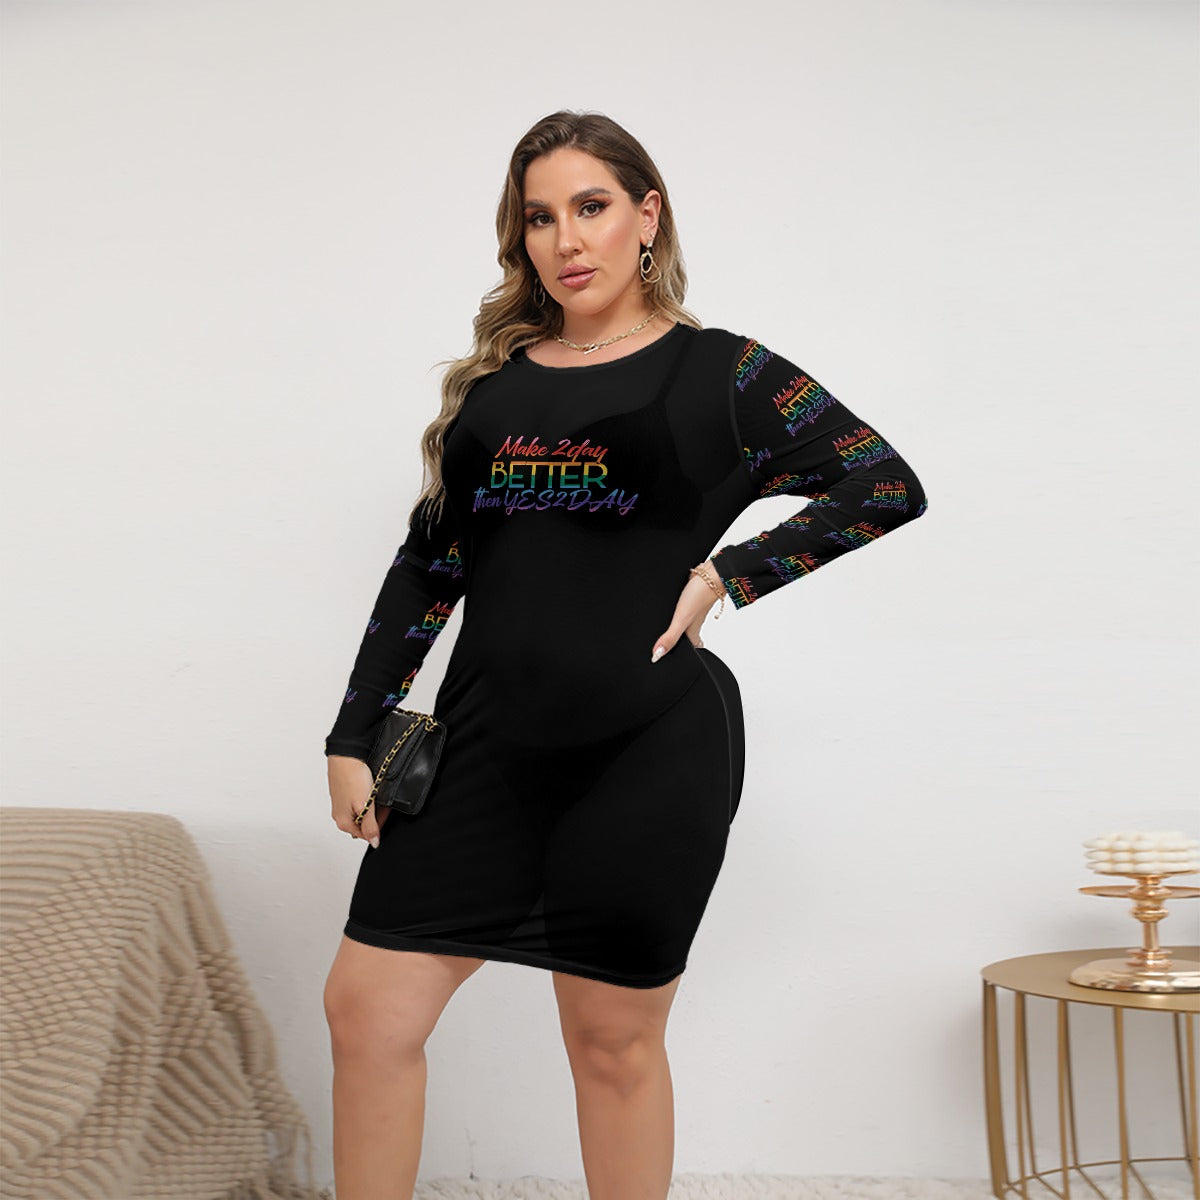 Women's PRIDE Make 2Day Better Then YES2DAY Mesh Dress (Plus Size)